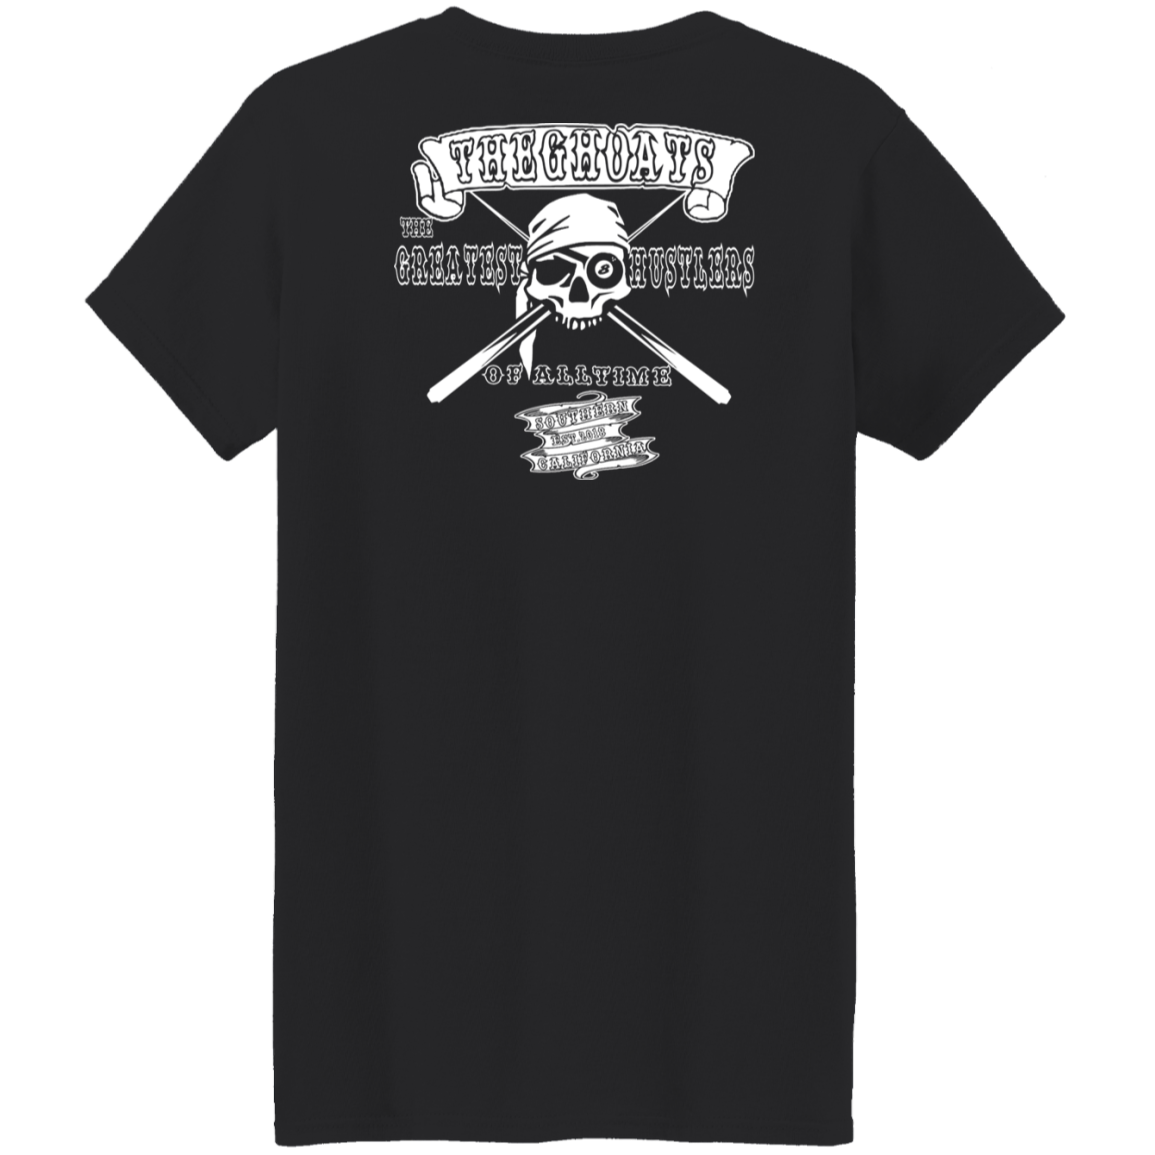 The GHOATS Custom Design. #4 Motorcycle Club Style. Ver 2/2. Ladies' Basic T-Shirt